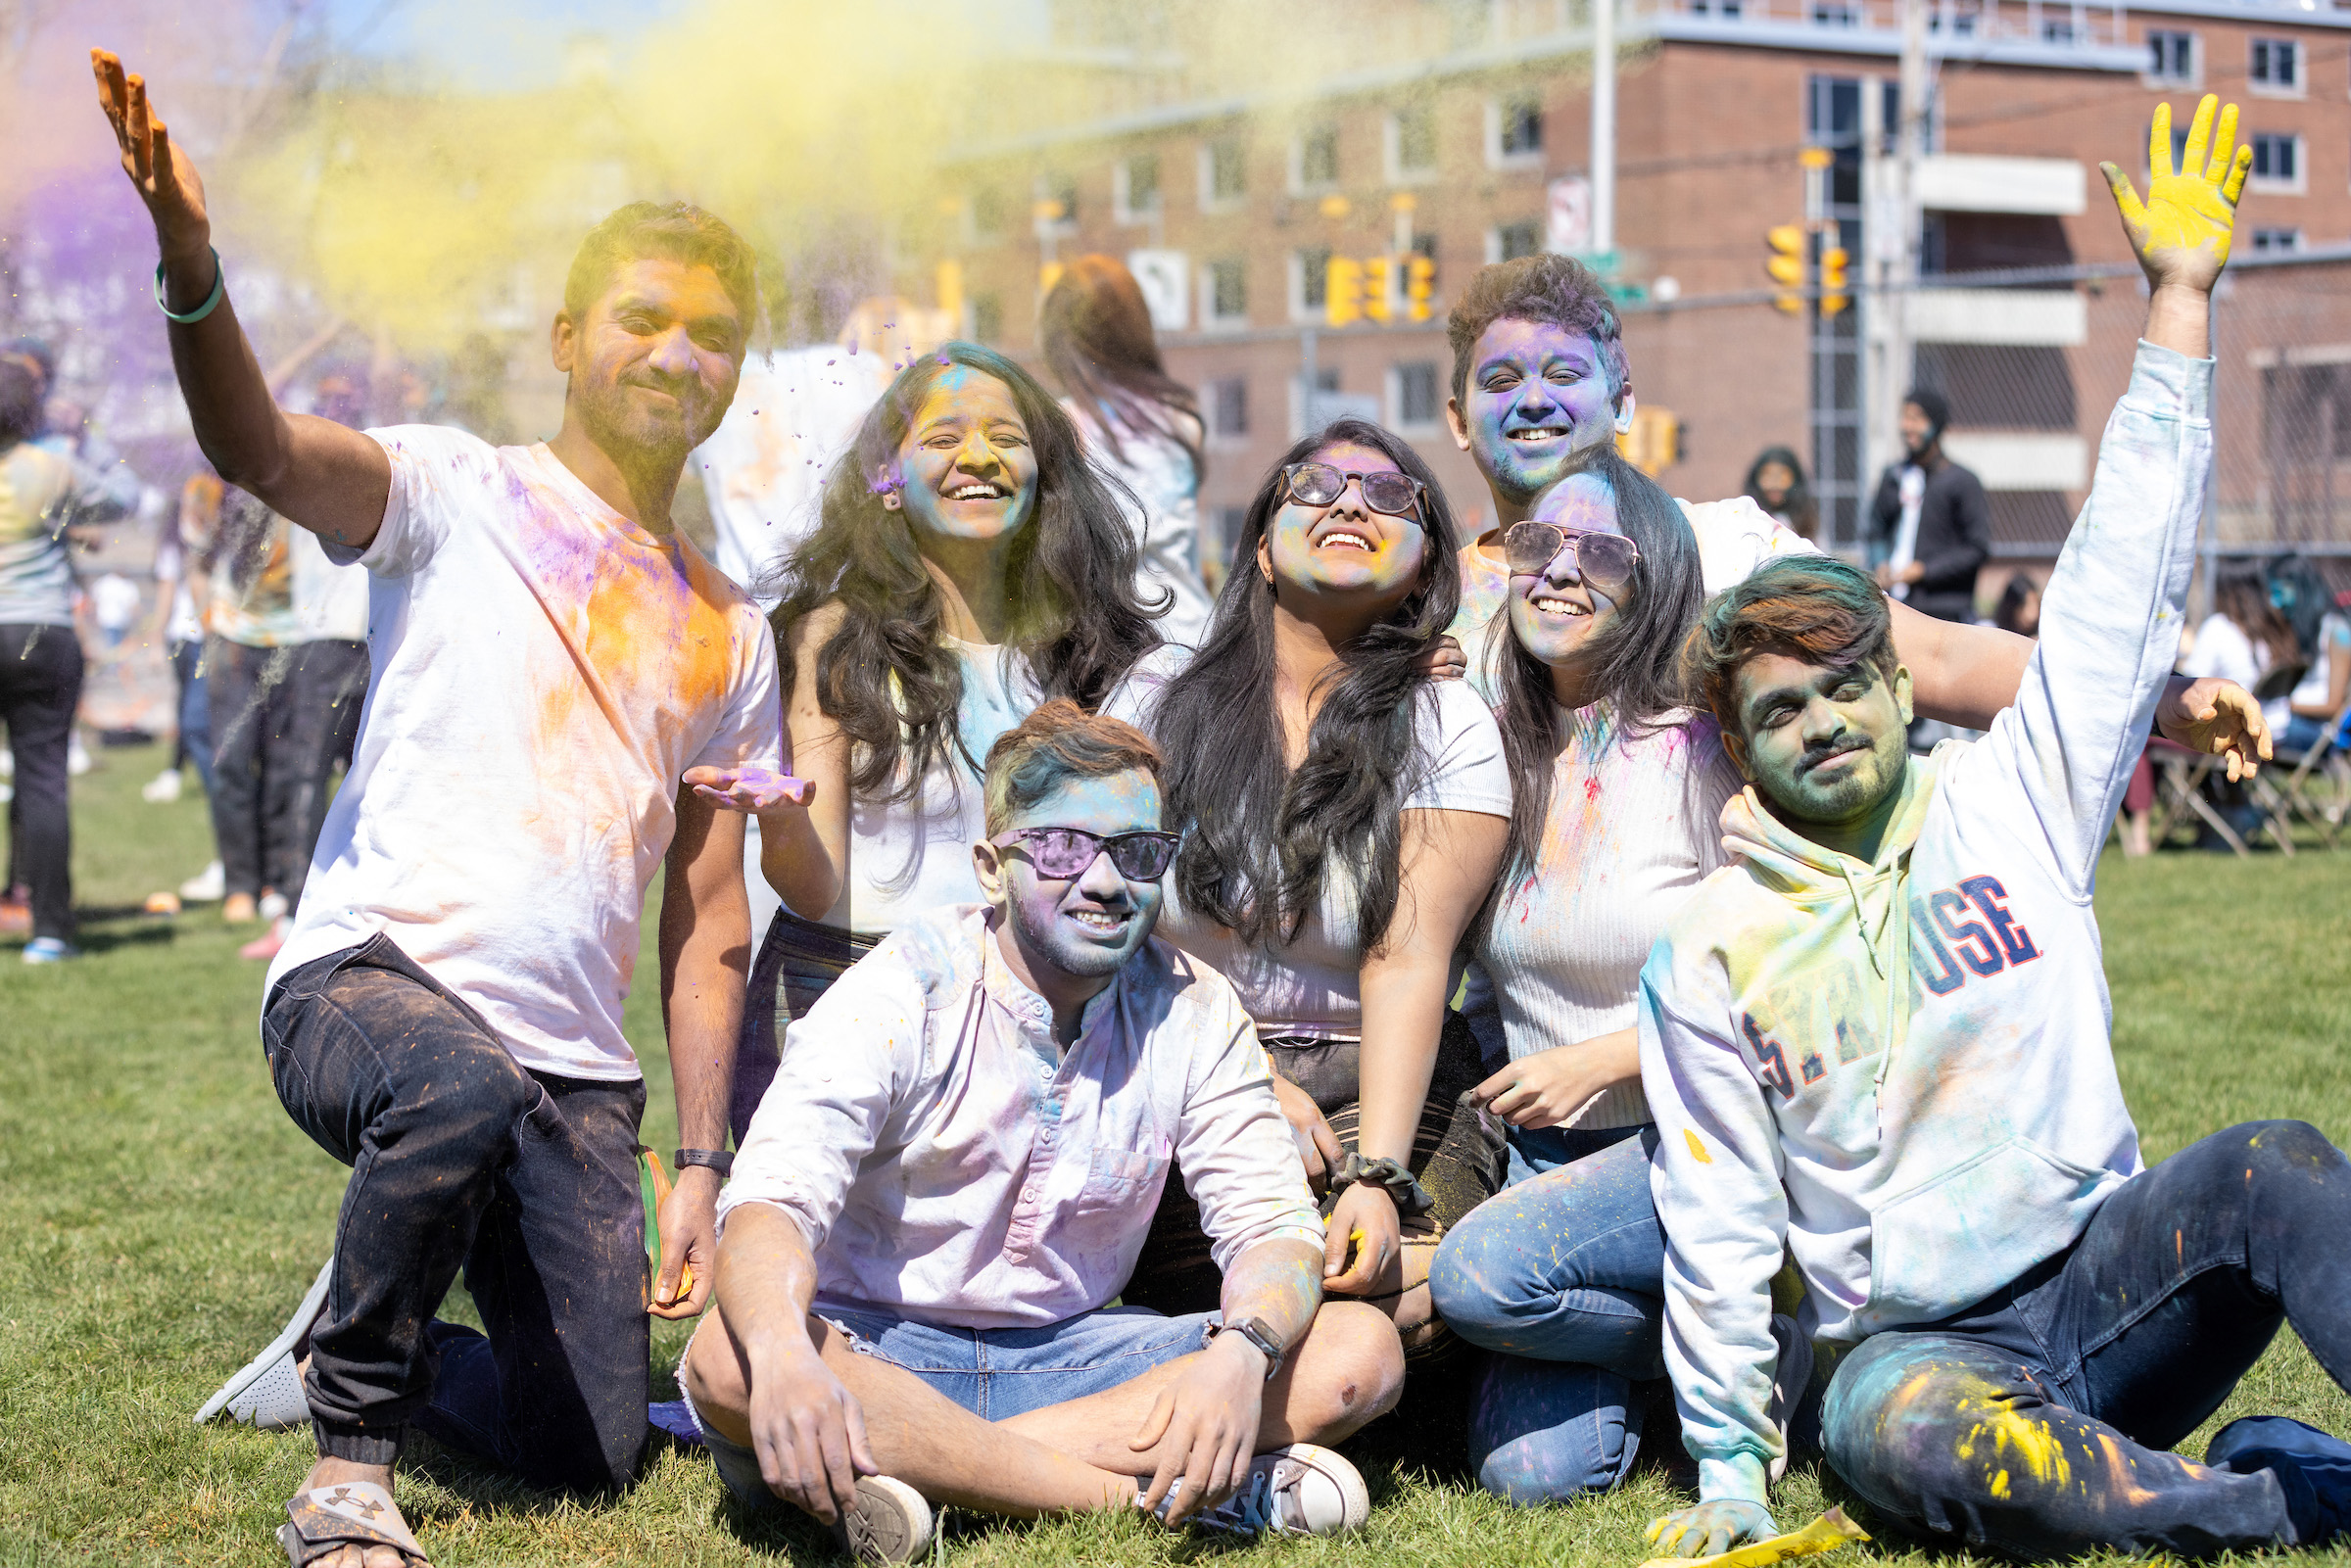 Group of students sitting together in colorful white shirts of different colors.